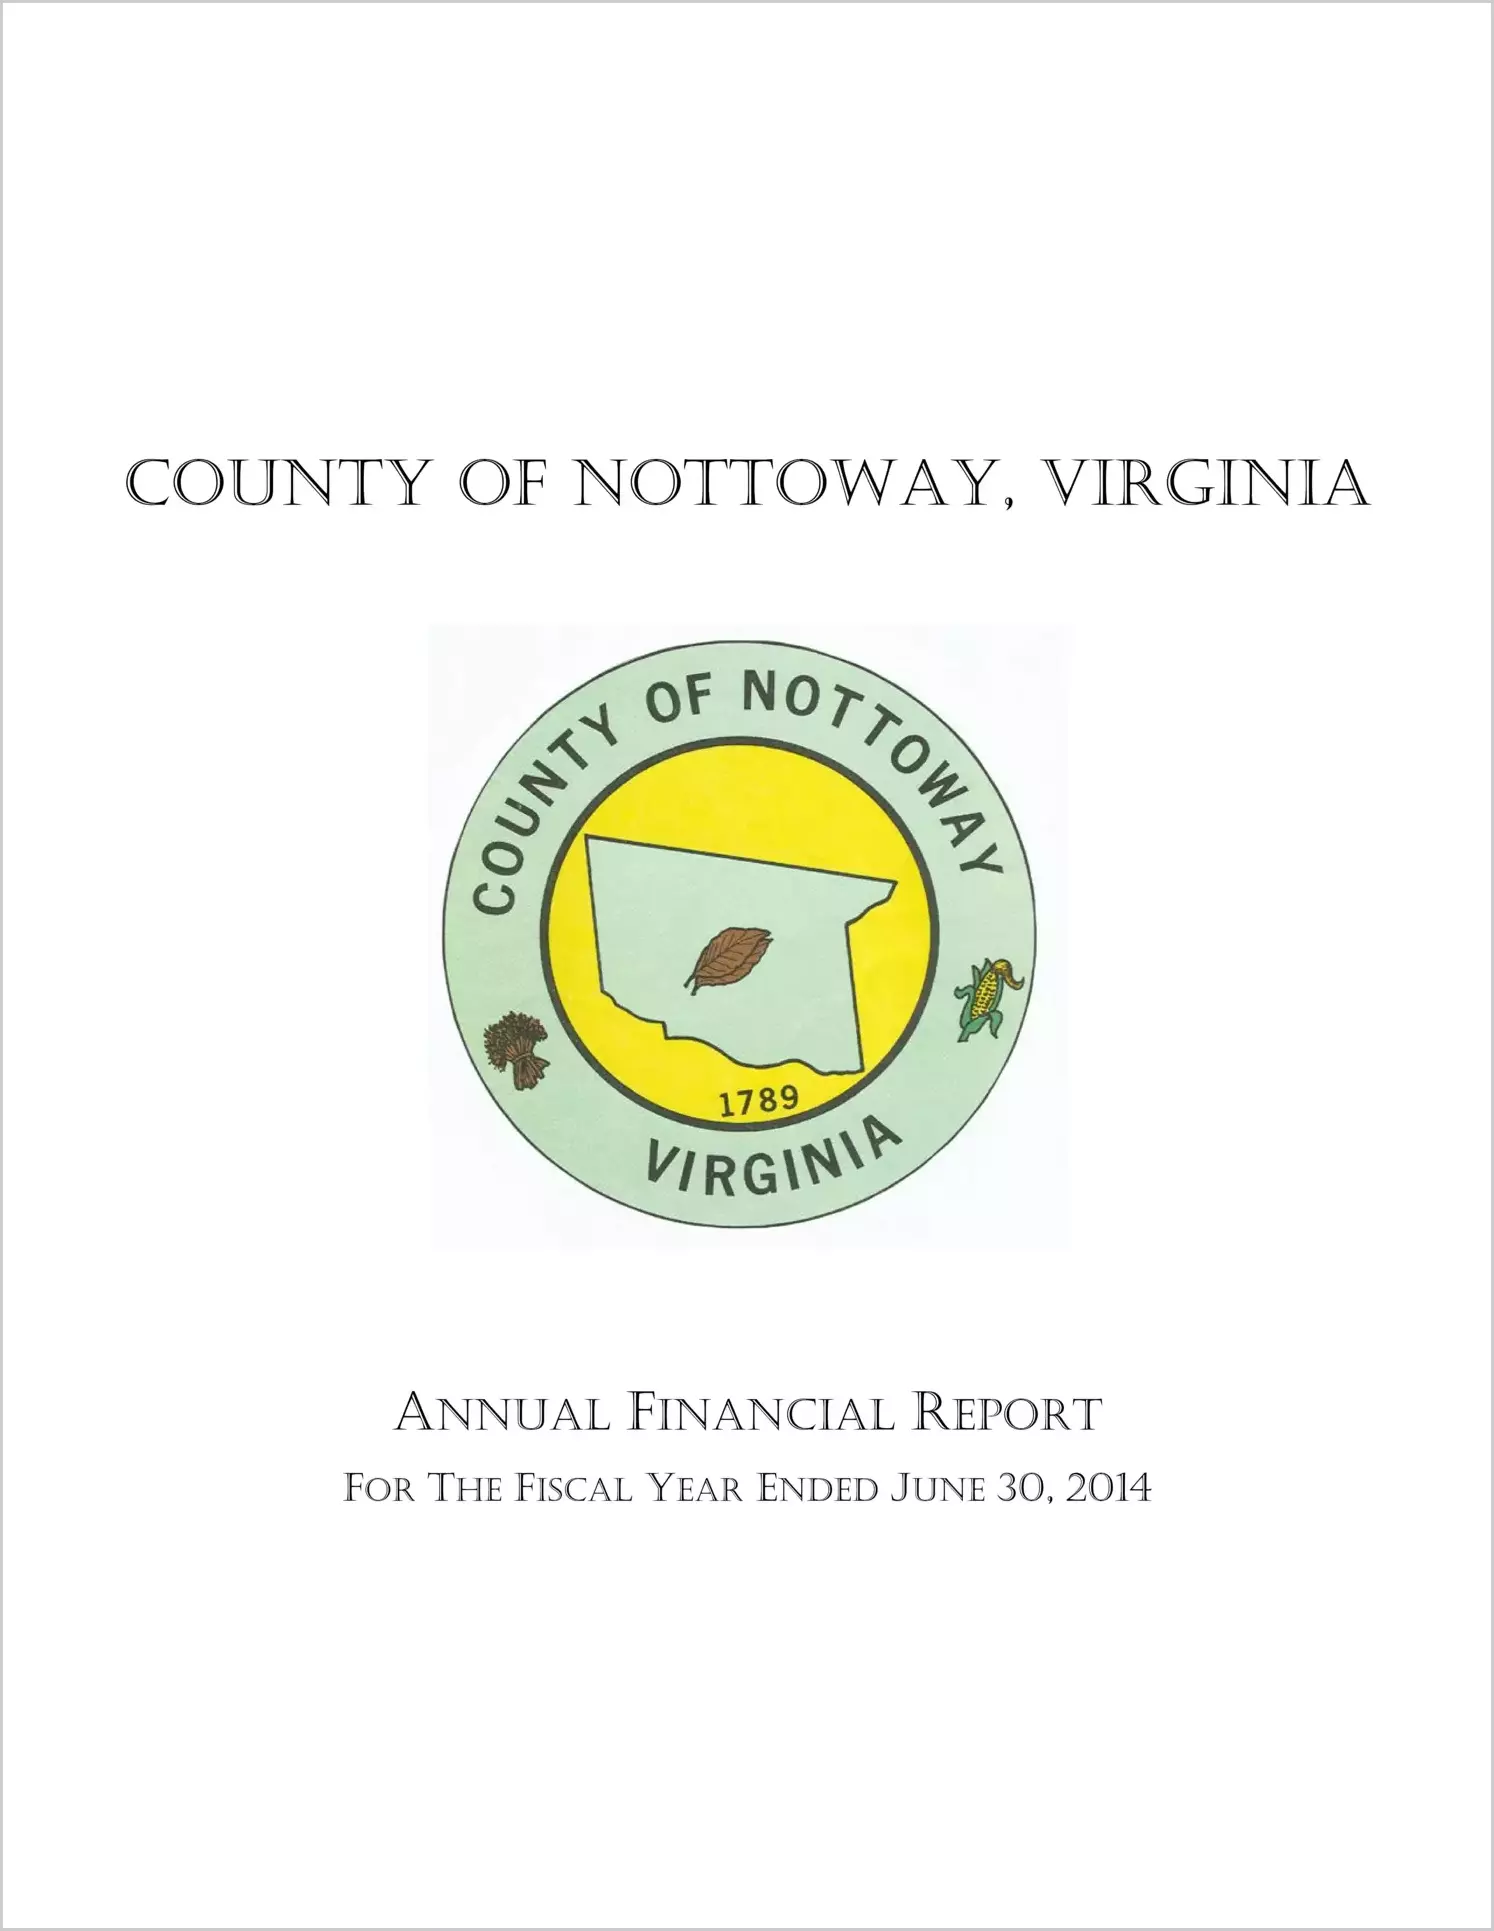 2014 Annual Financial Report for County of Nottoway